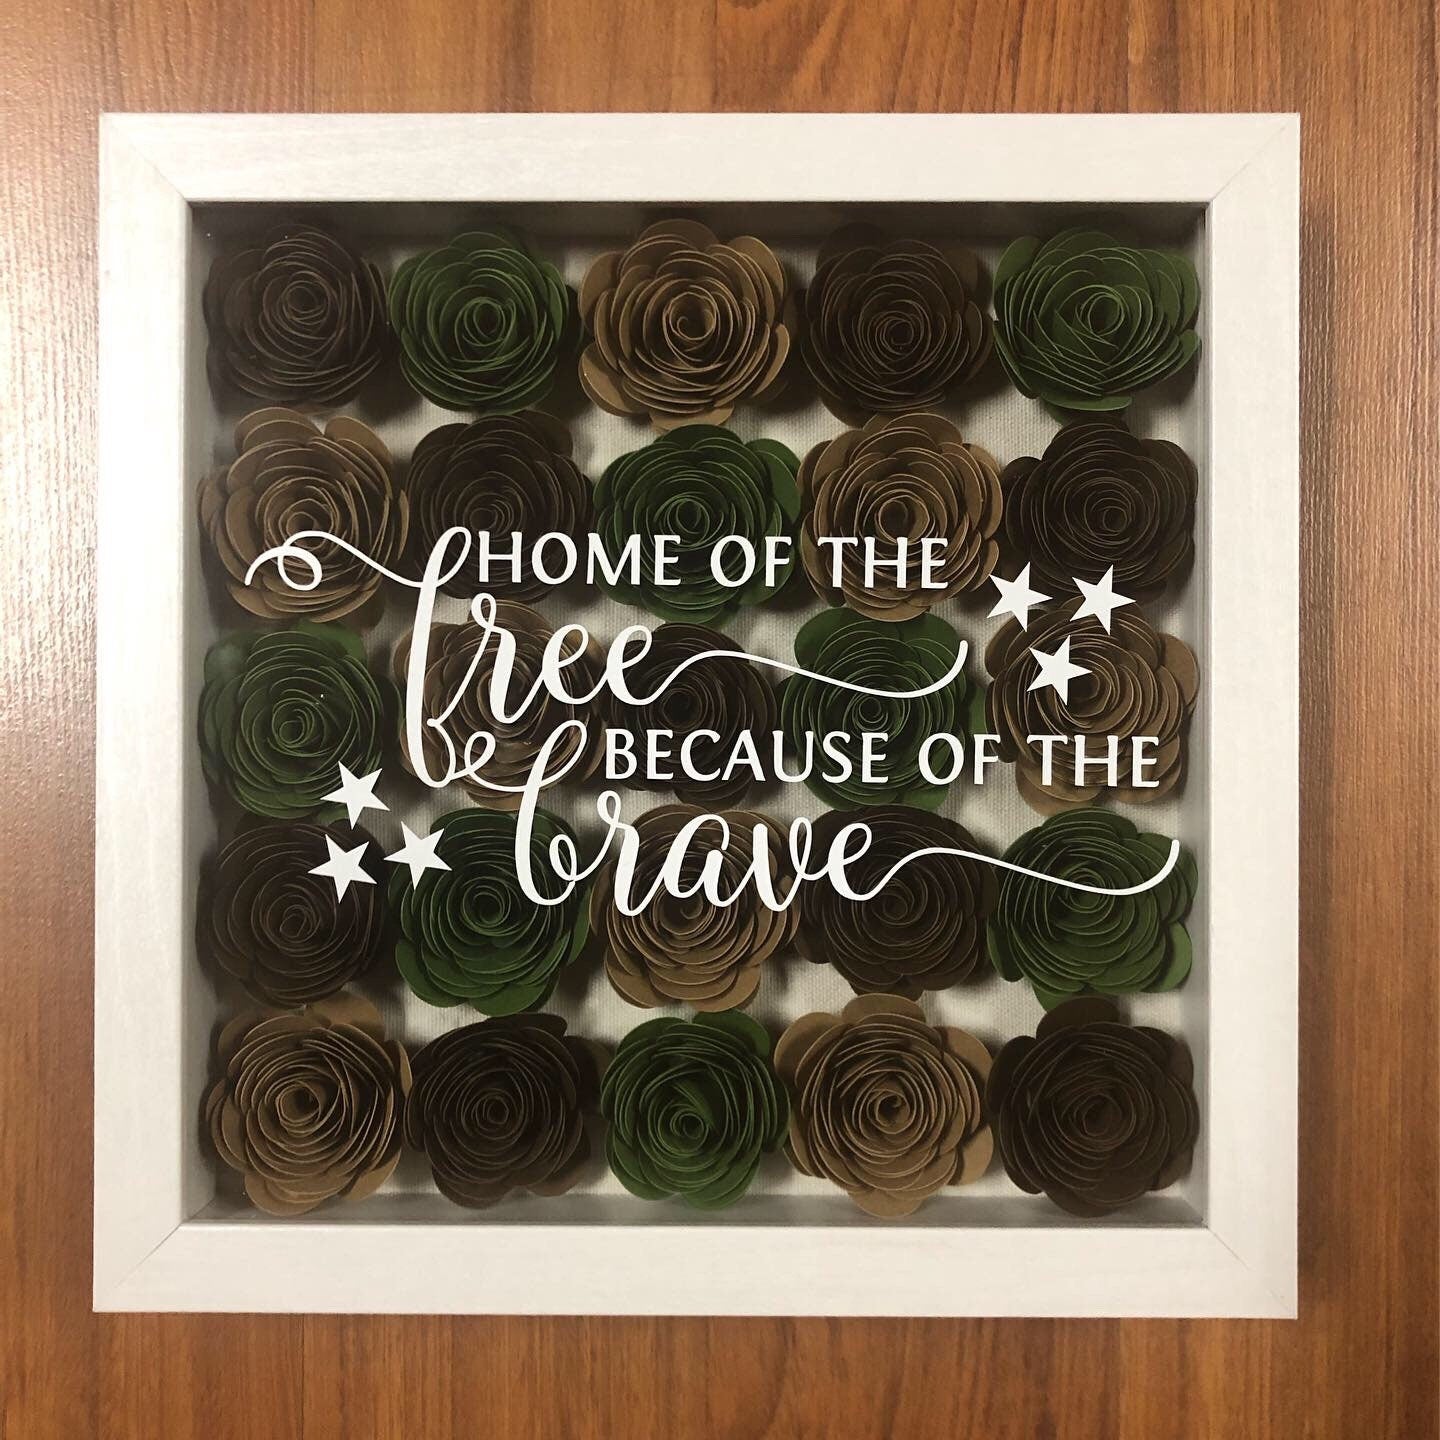 Home of the free because of the brave shadow box. Patriotic Shadowbox. Army colors Shadow box - Gift for Solider and Veteran